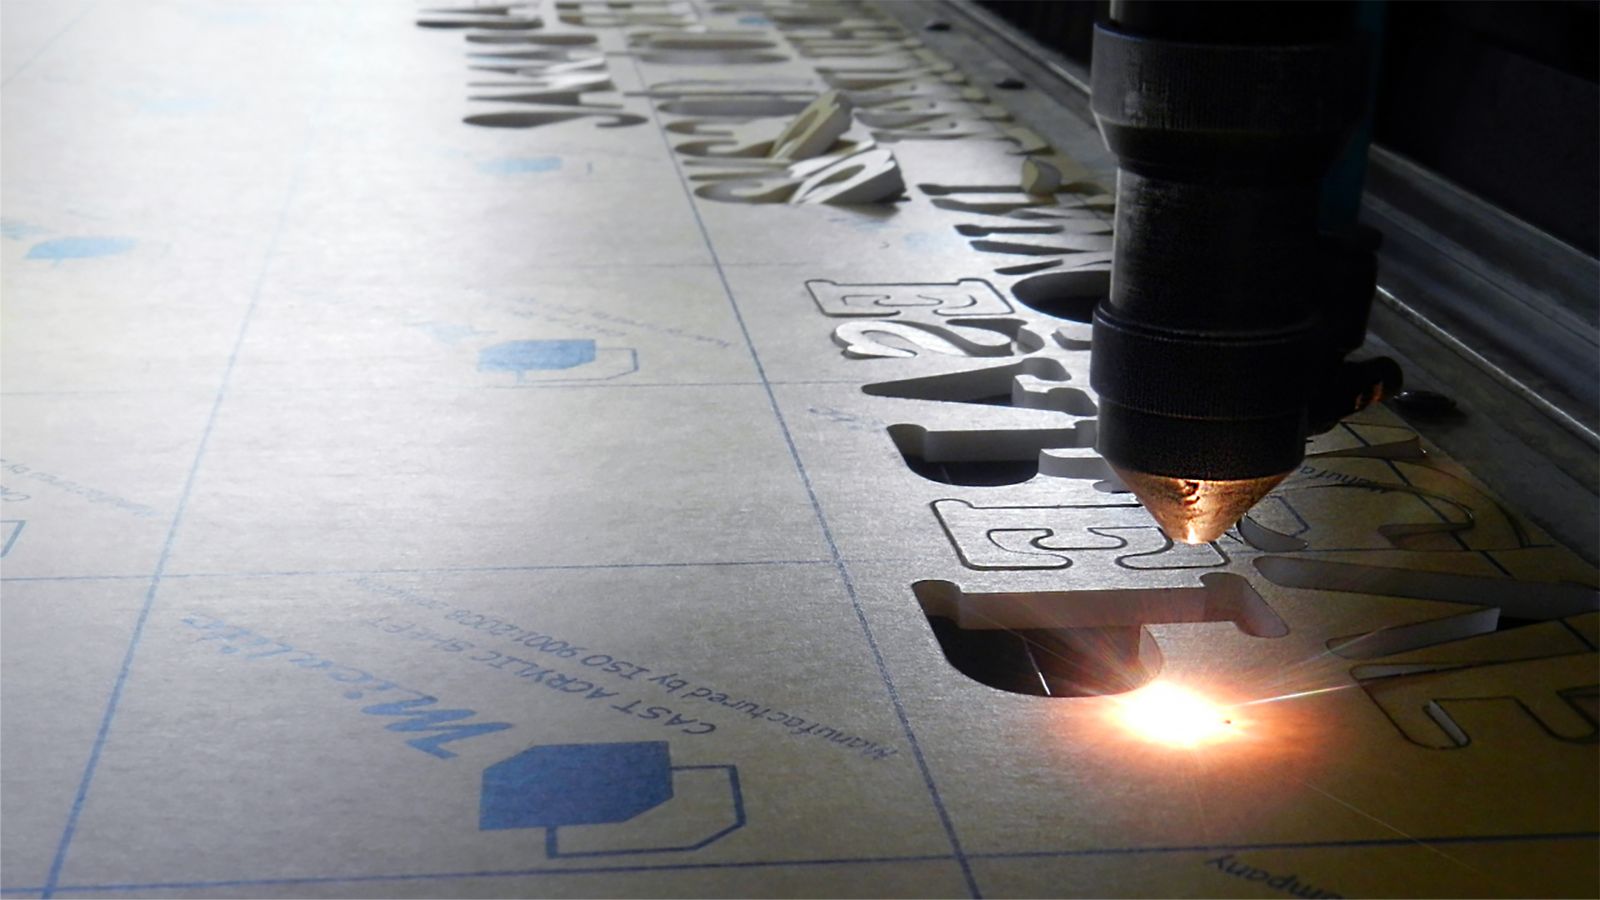 Get the Best Results Out of Your Engraving